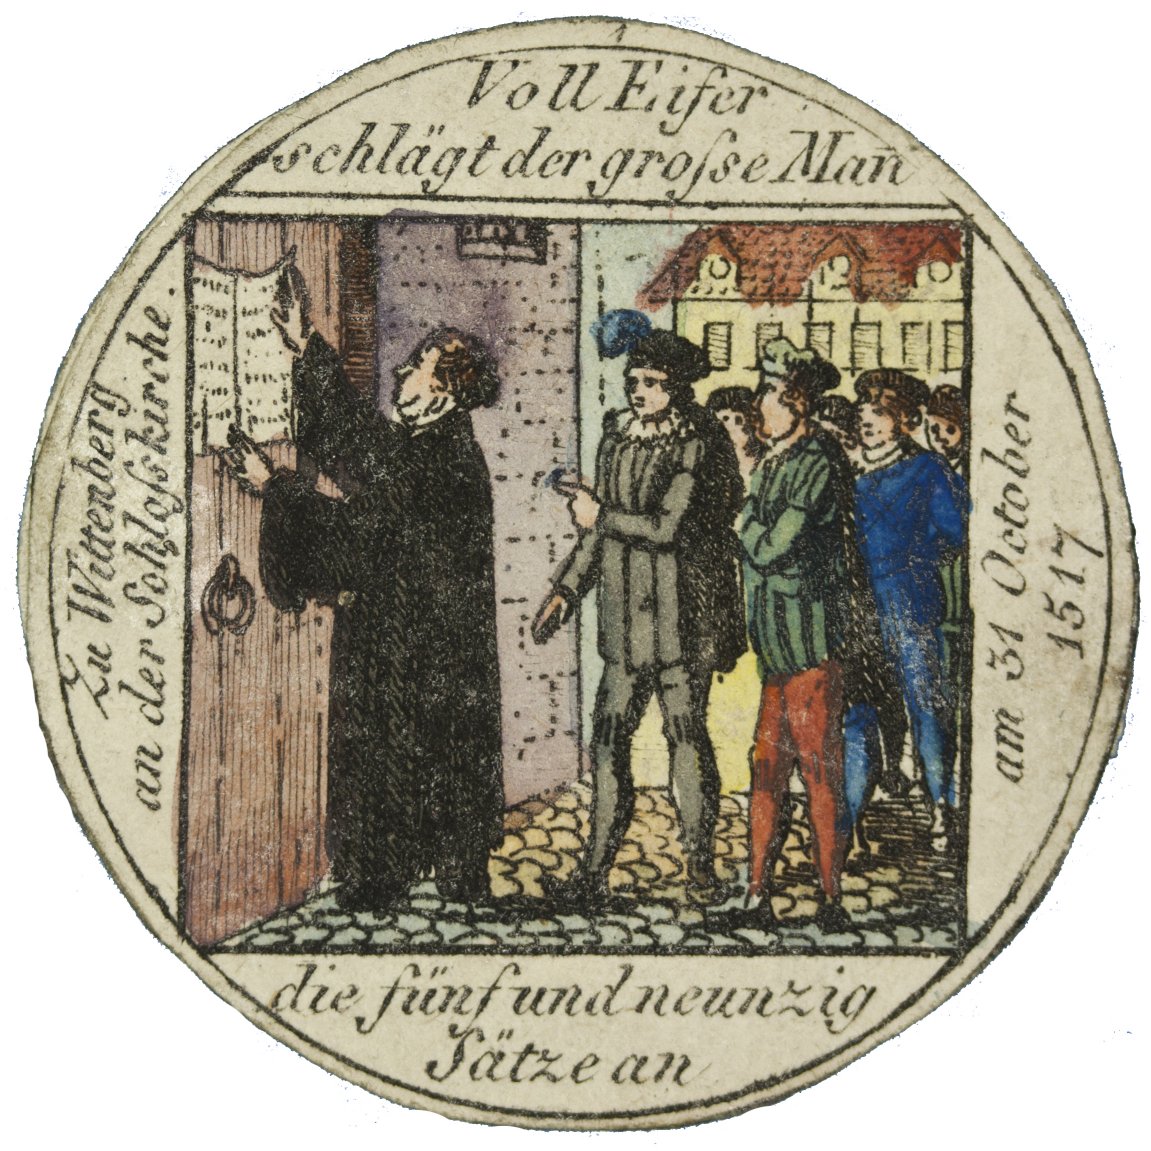 
Medal design for the 300th anniversary of the Reformation, 1817. Lutheran School of Theology, Chicago.